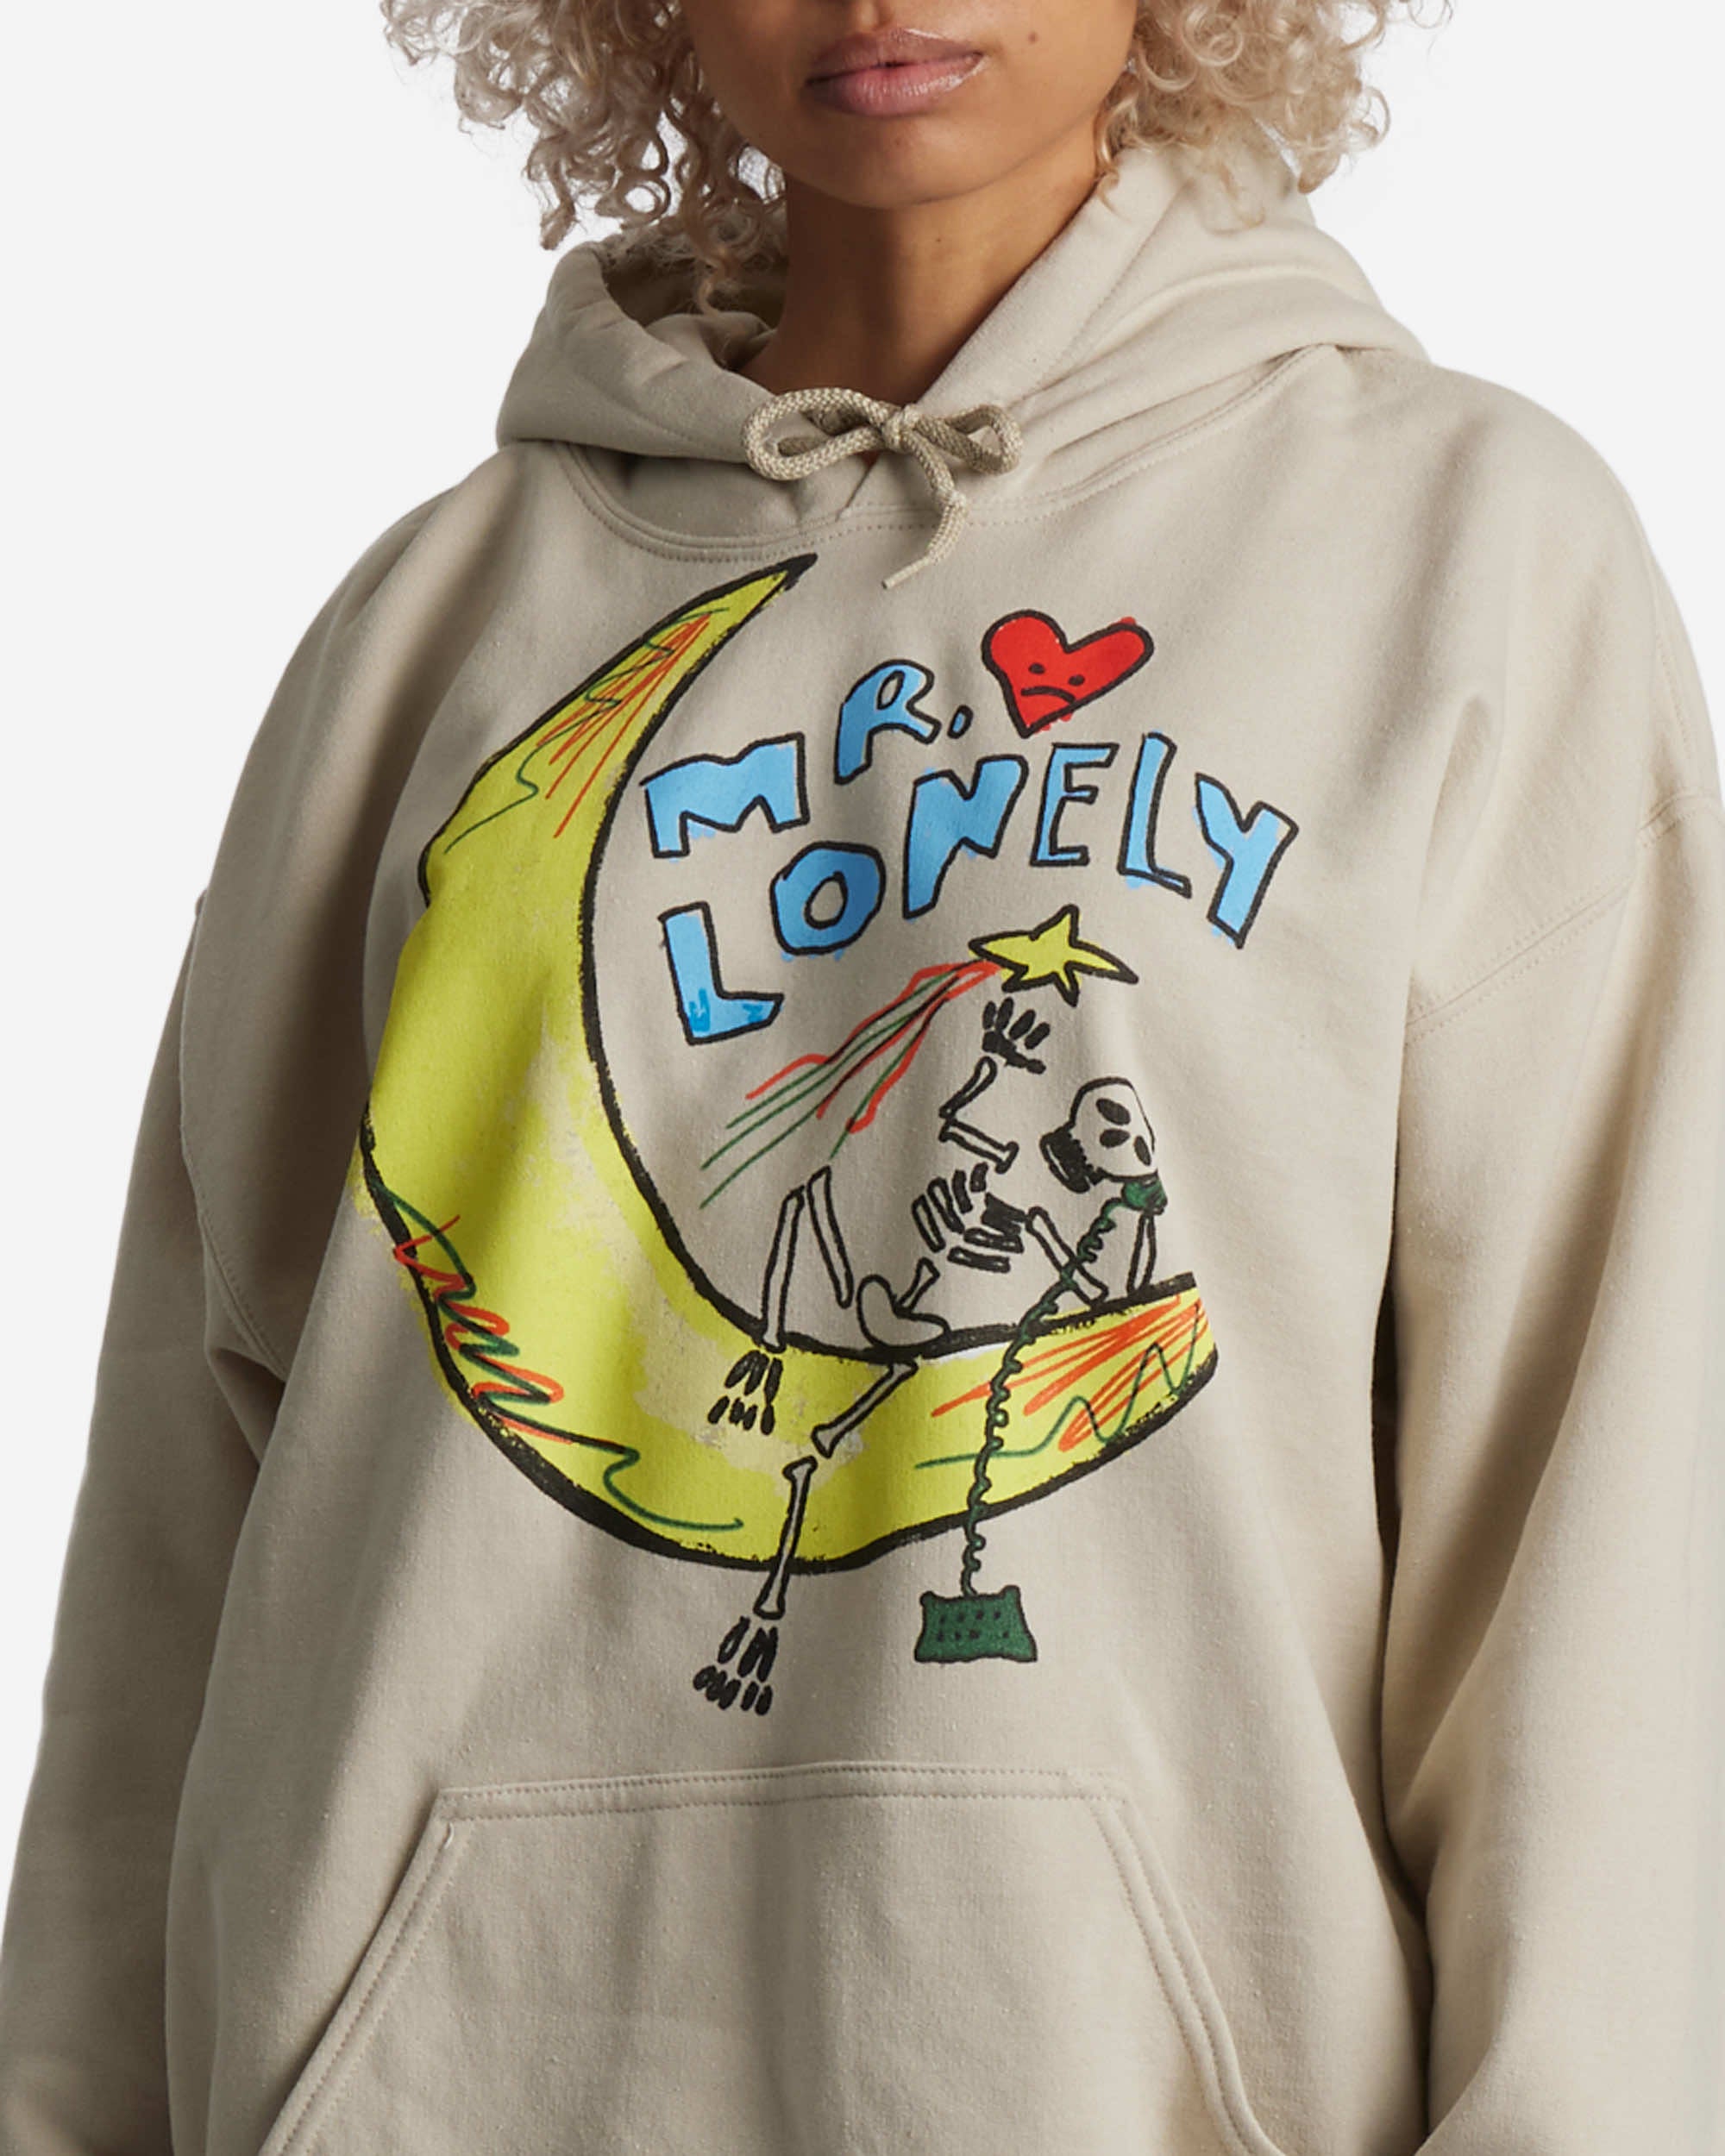 The Lonely Caller Hoodie